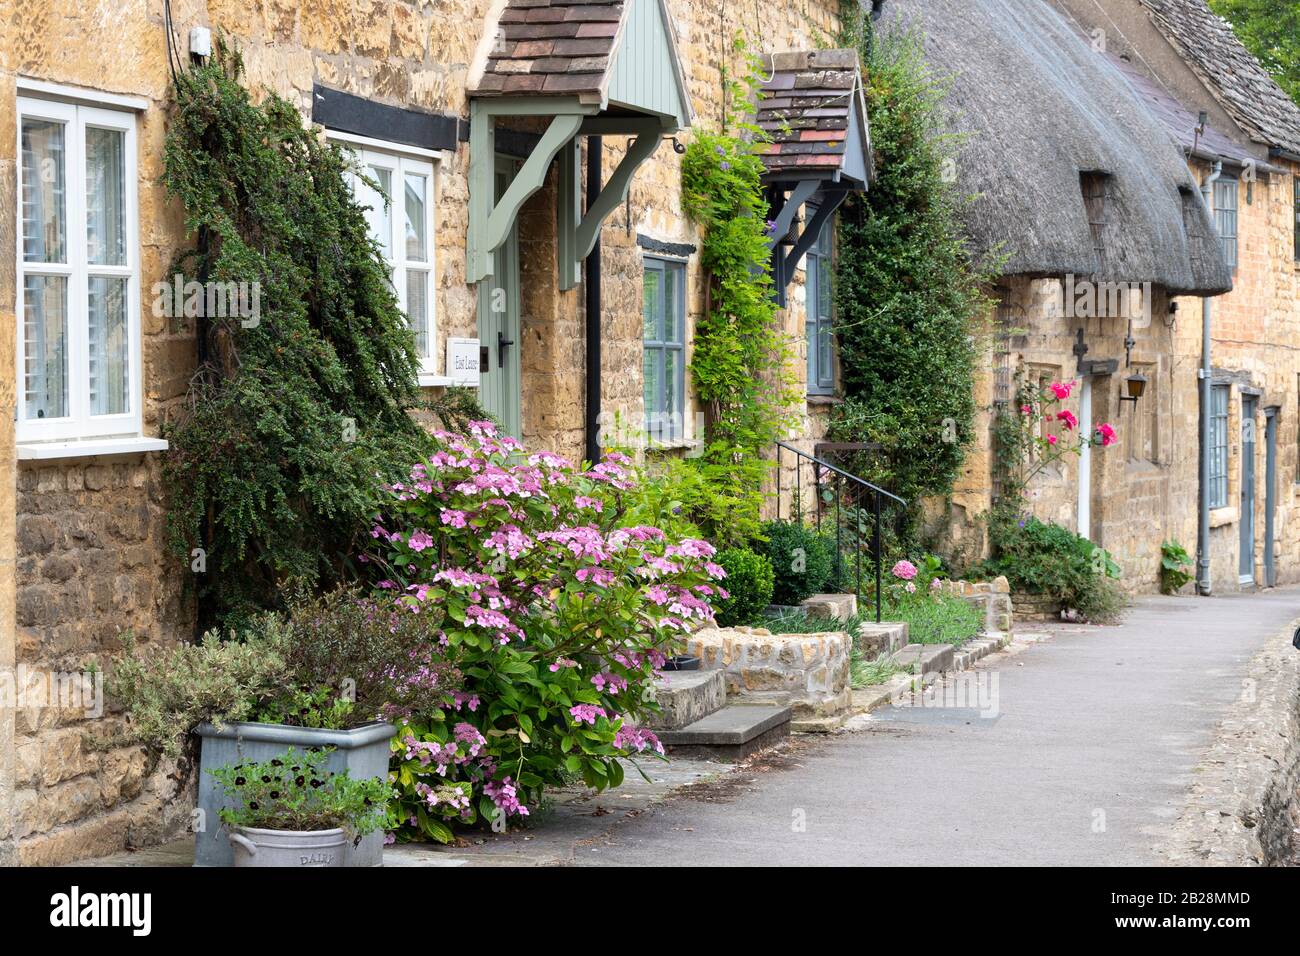 Row of houses with trees and gardens close to the steret, Chipping Campden, Gloucestershire,Cotswolds, England Stock Photo